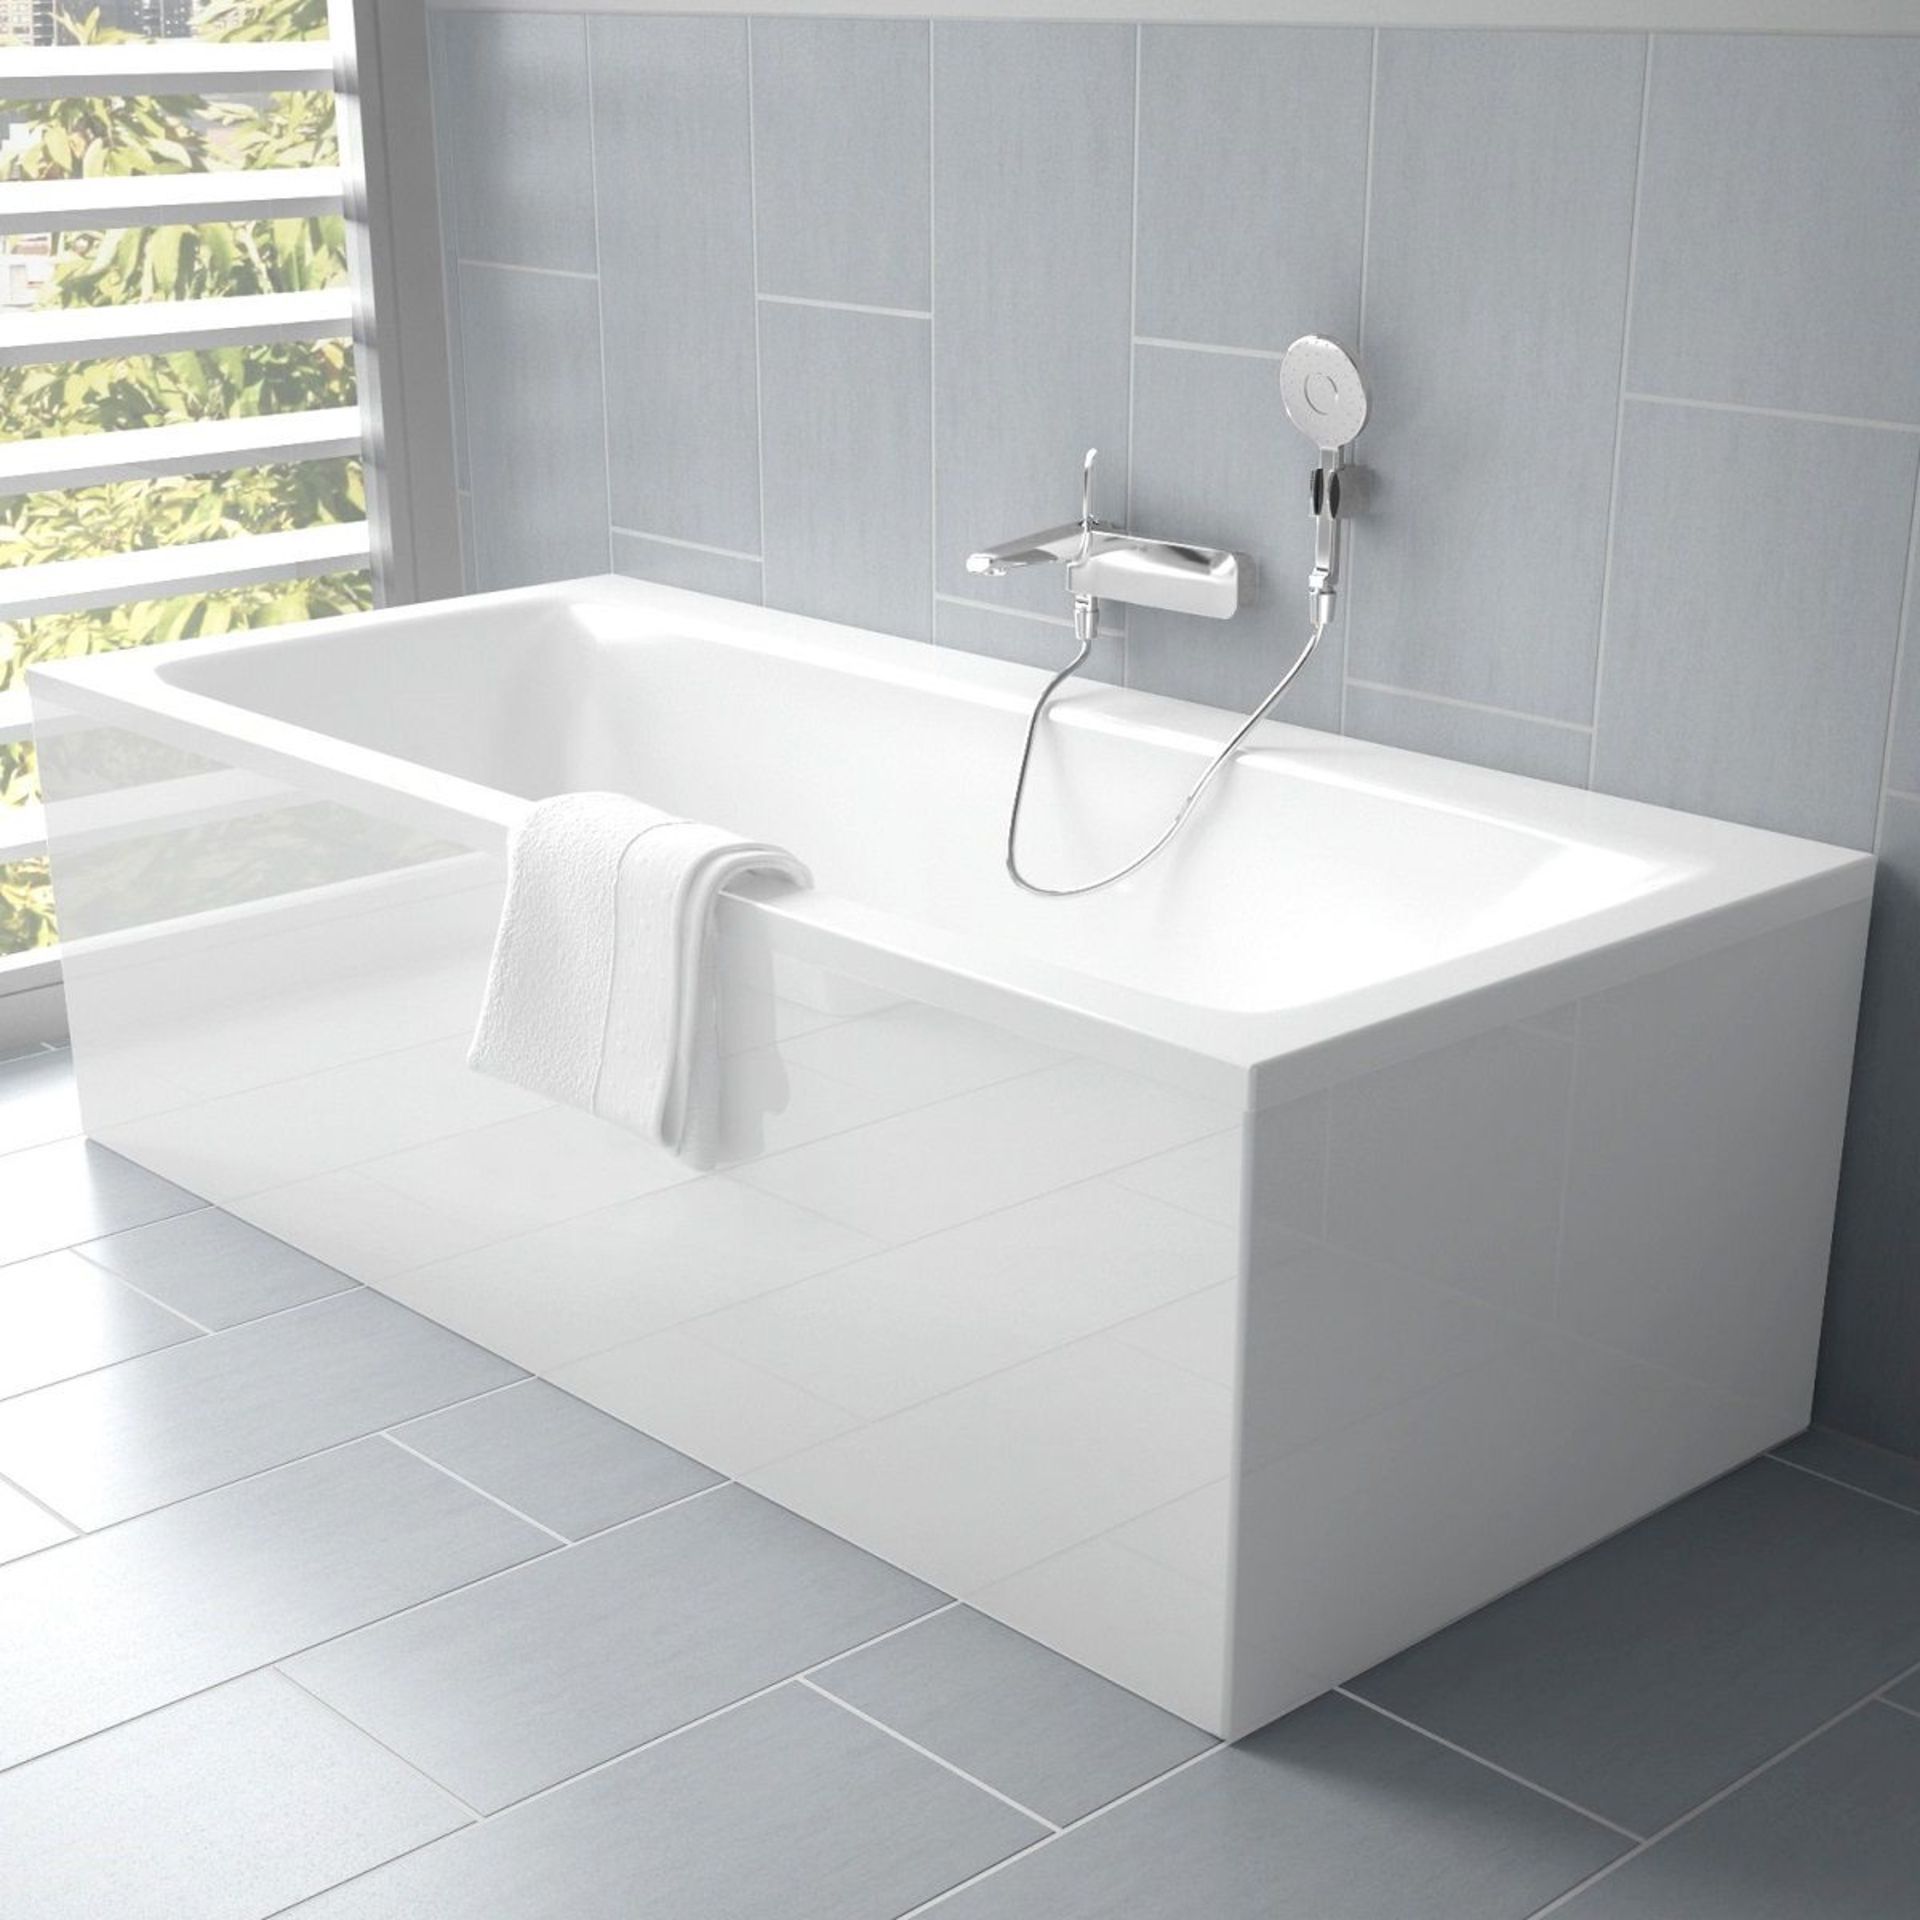 (CE2) 2000x900mm Keramag Deep Double Ended Bath. RRP £997.99.Our range of double ended baths...